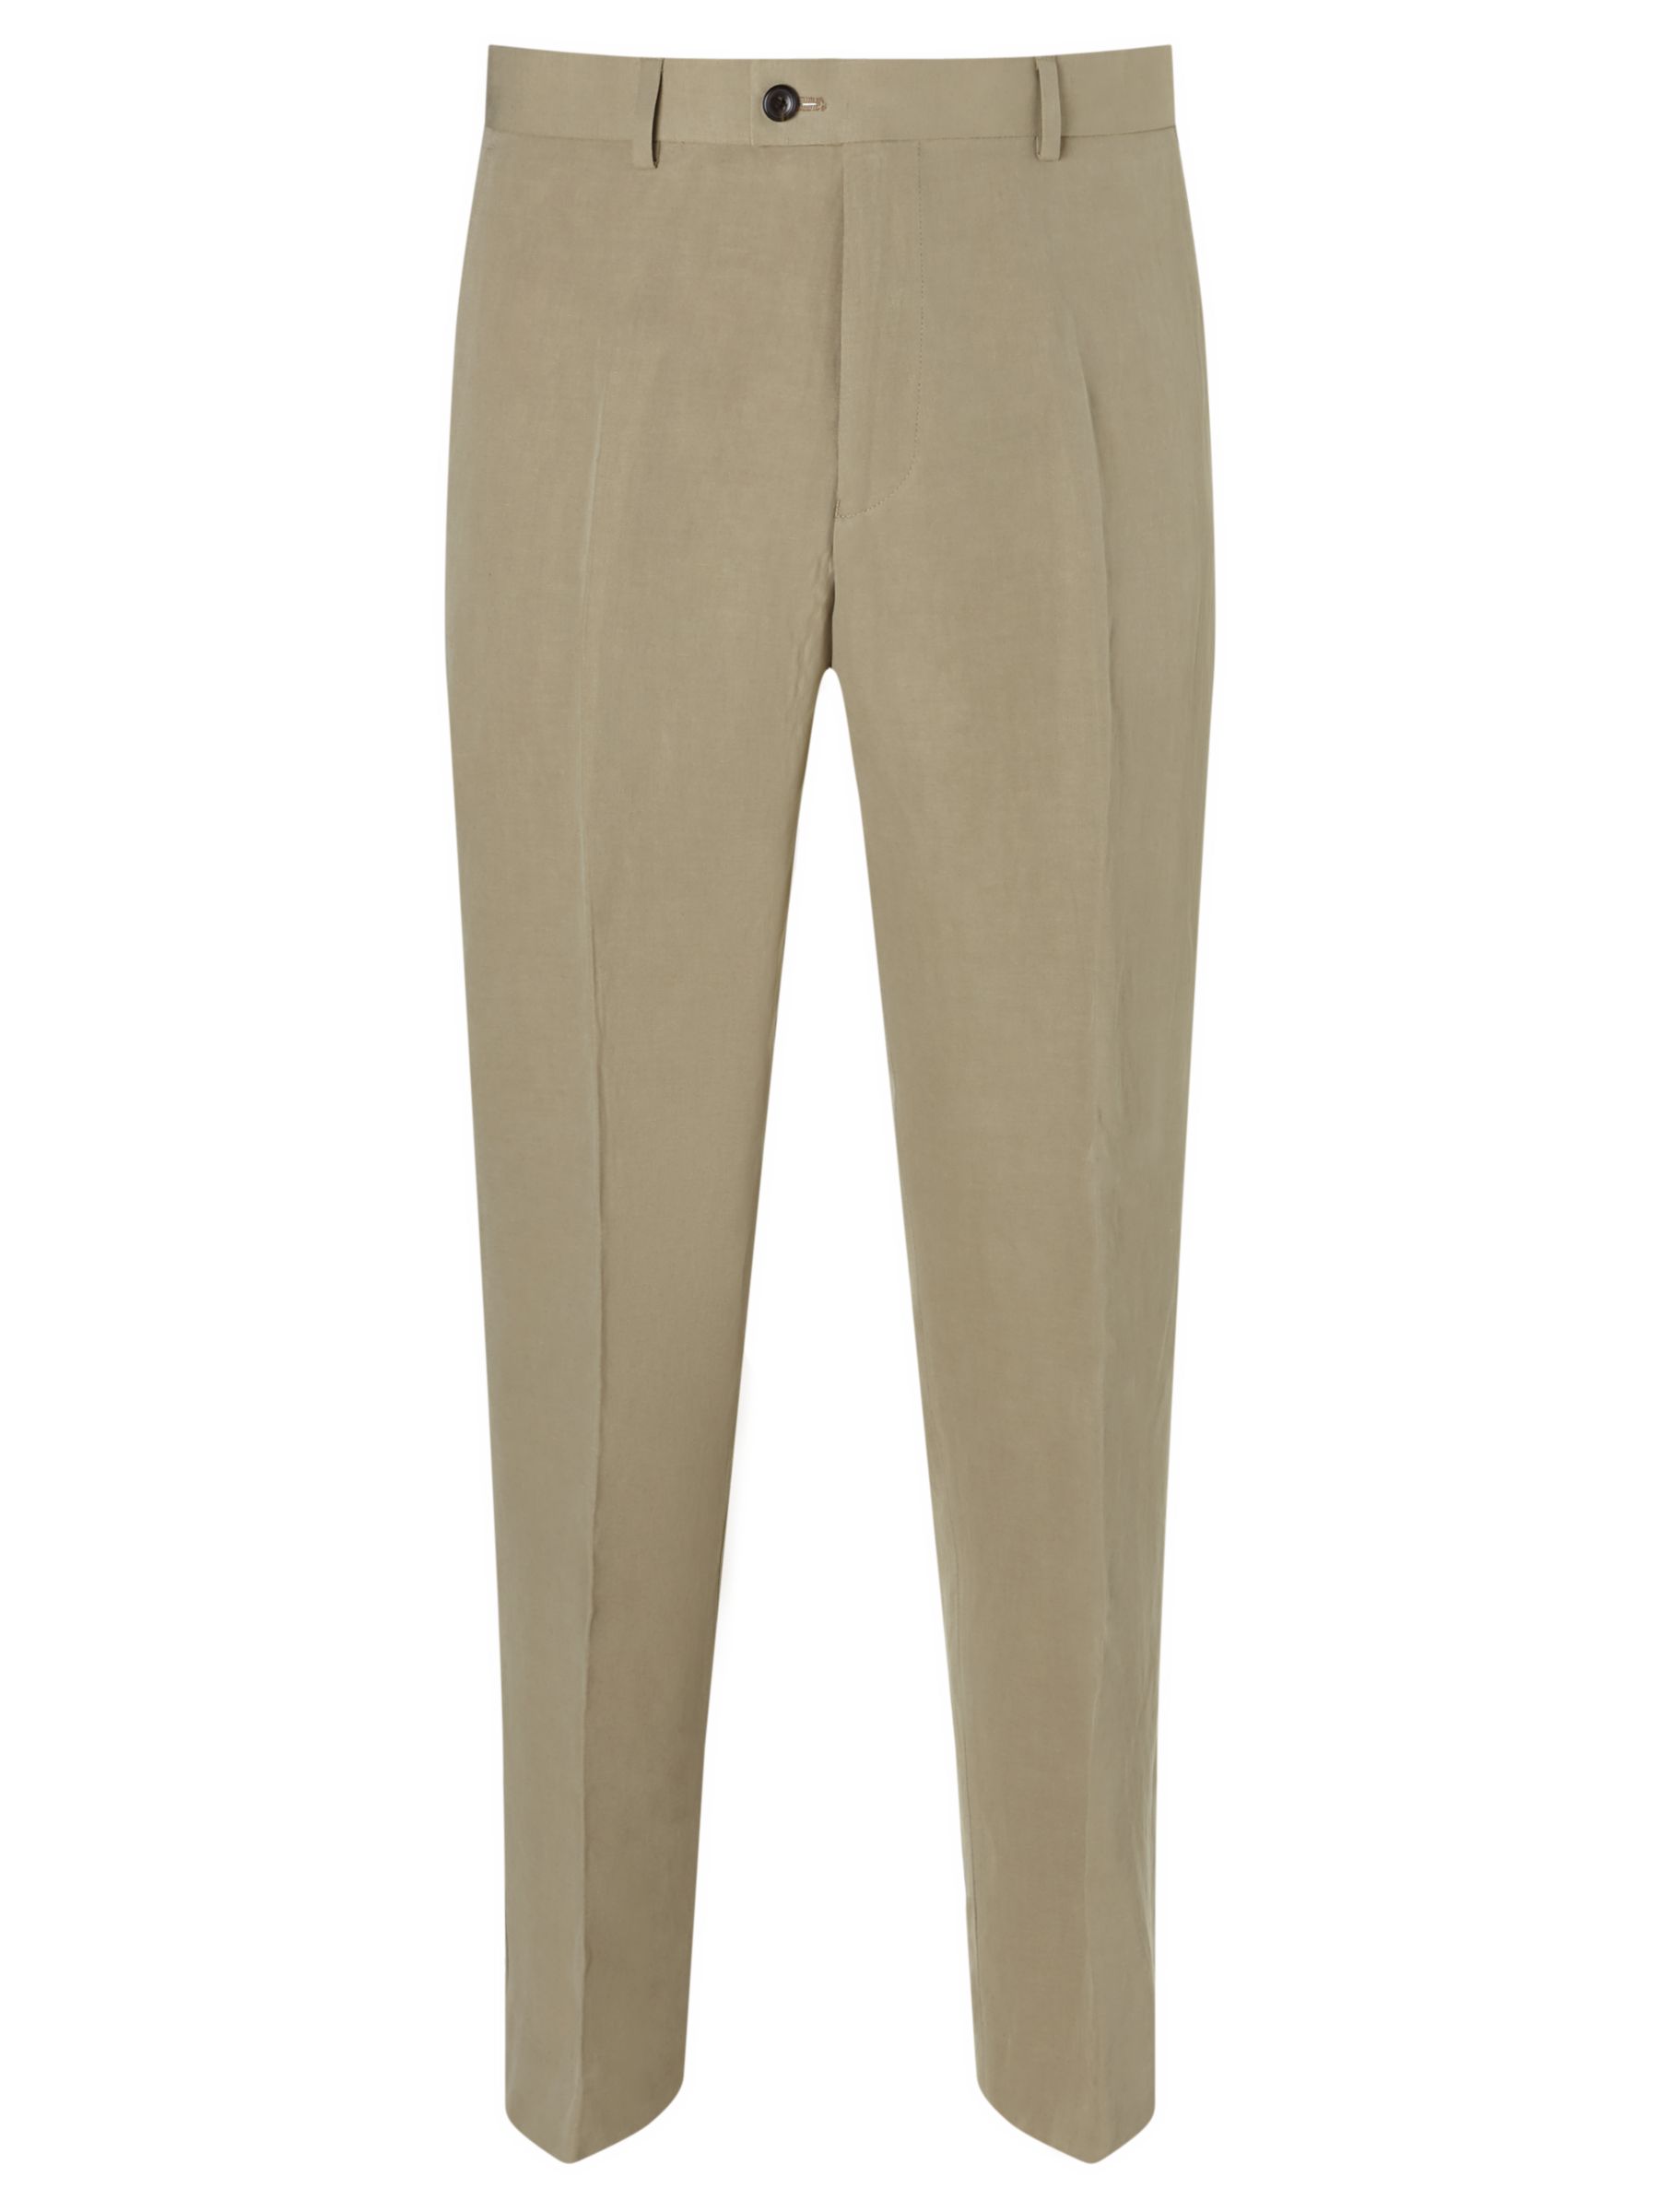 John Lewis & Partners Silk and Linen Suit Trousers, Stone